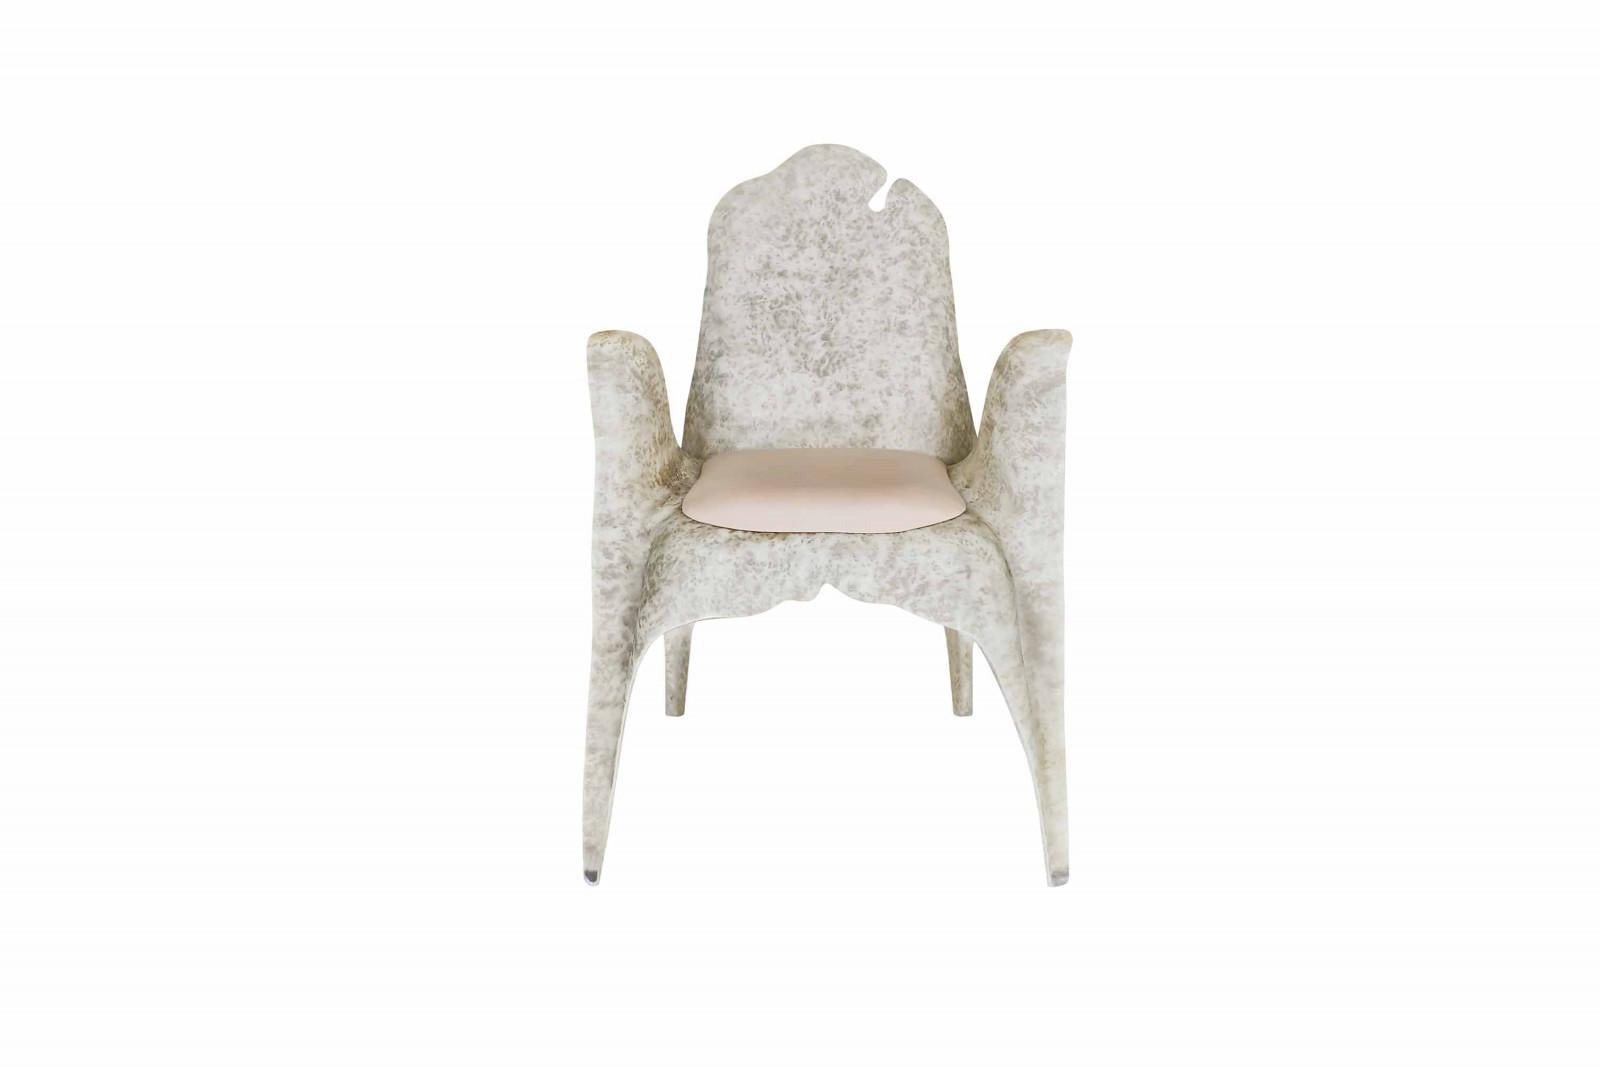 Contemporary dining chair built with resin reinforced fiberglass. This highly resistant material is very durable and requires no maintenance. The chairs are then given an metallic iron finish done by special artisans. Seat cushion upholstered